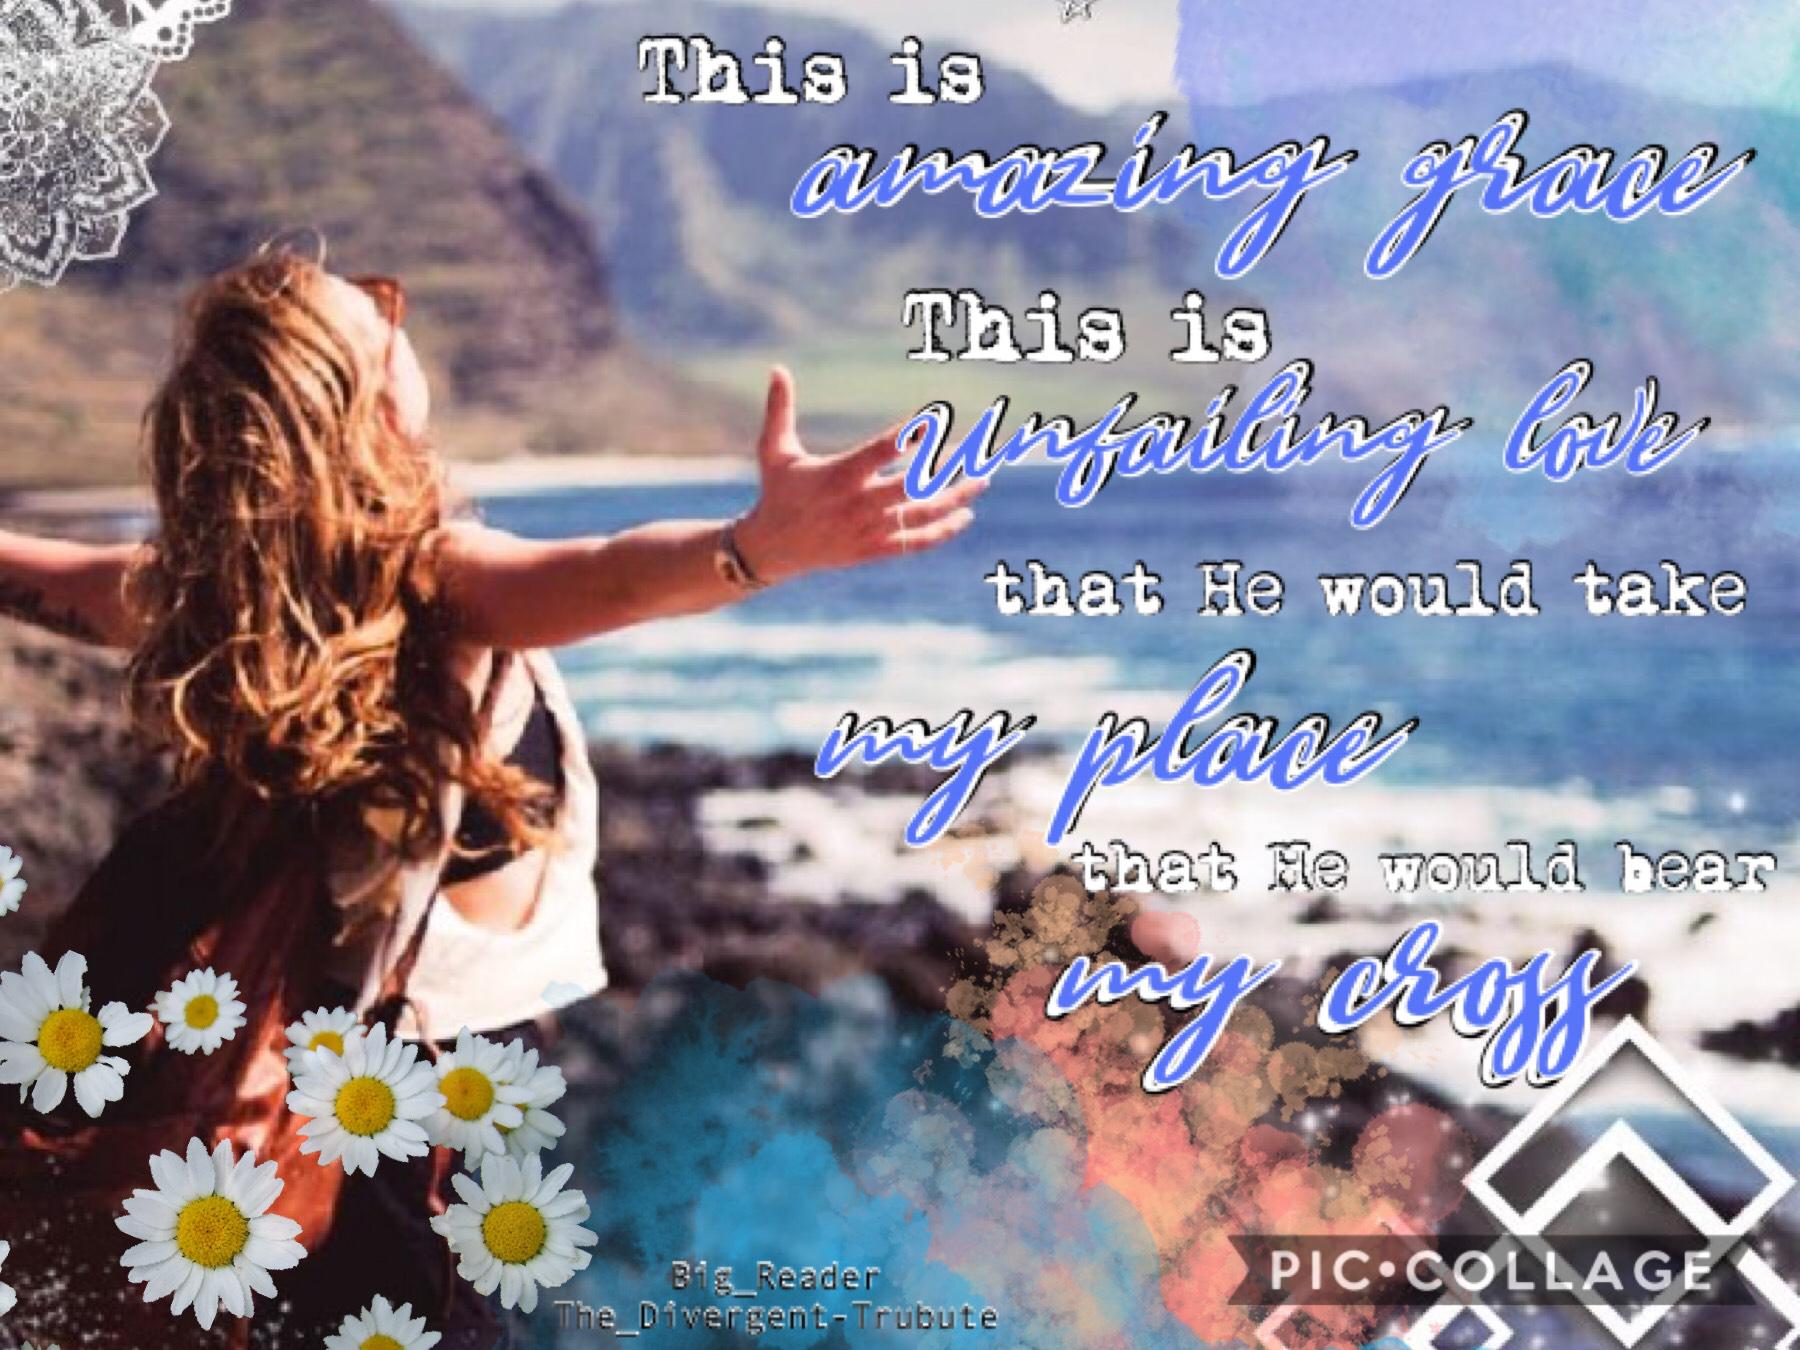 Collab with The_Divergent-Tribute ! “This is Amazing Grace” by Phil Whikham ✝️ such an amazing song! Please follow The_Divergent-Tribute! She’s so talented and sweet!! She did the background and I did the text✨QOTD:Have you entered my games yet?🧐